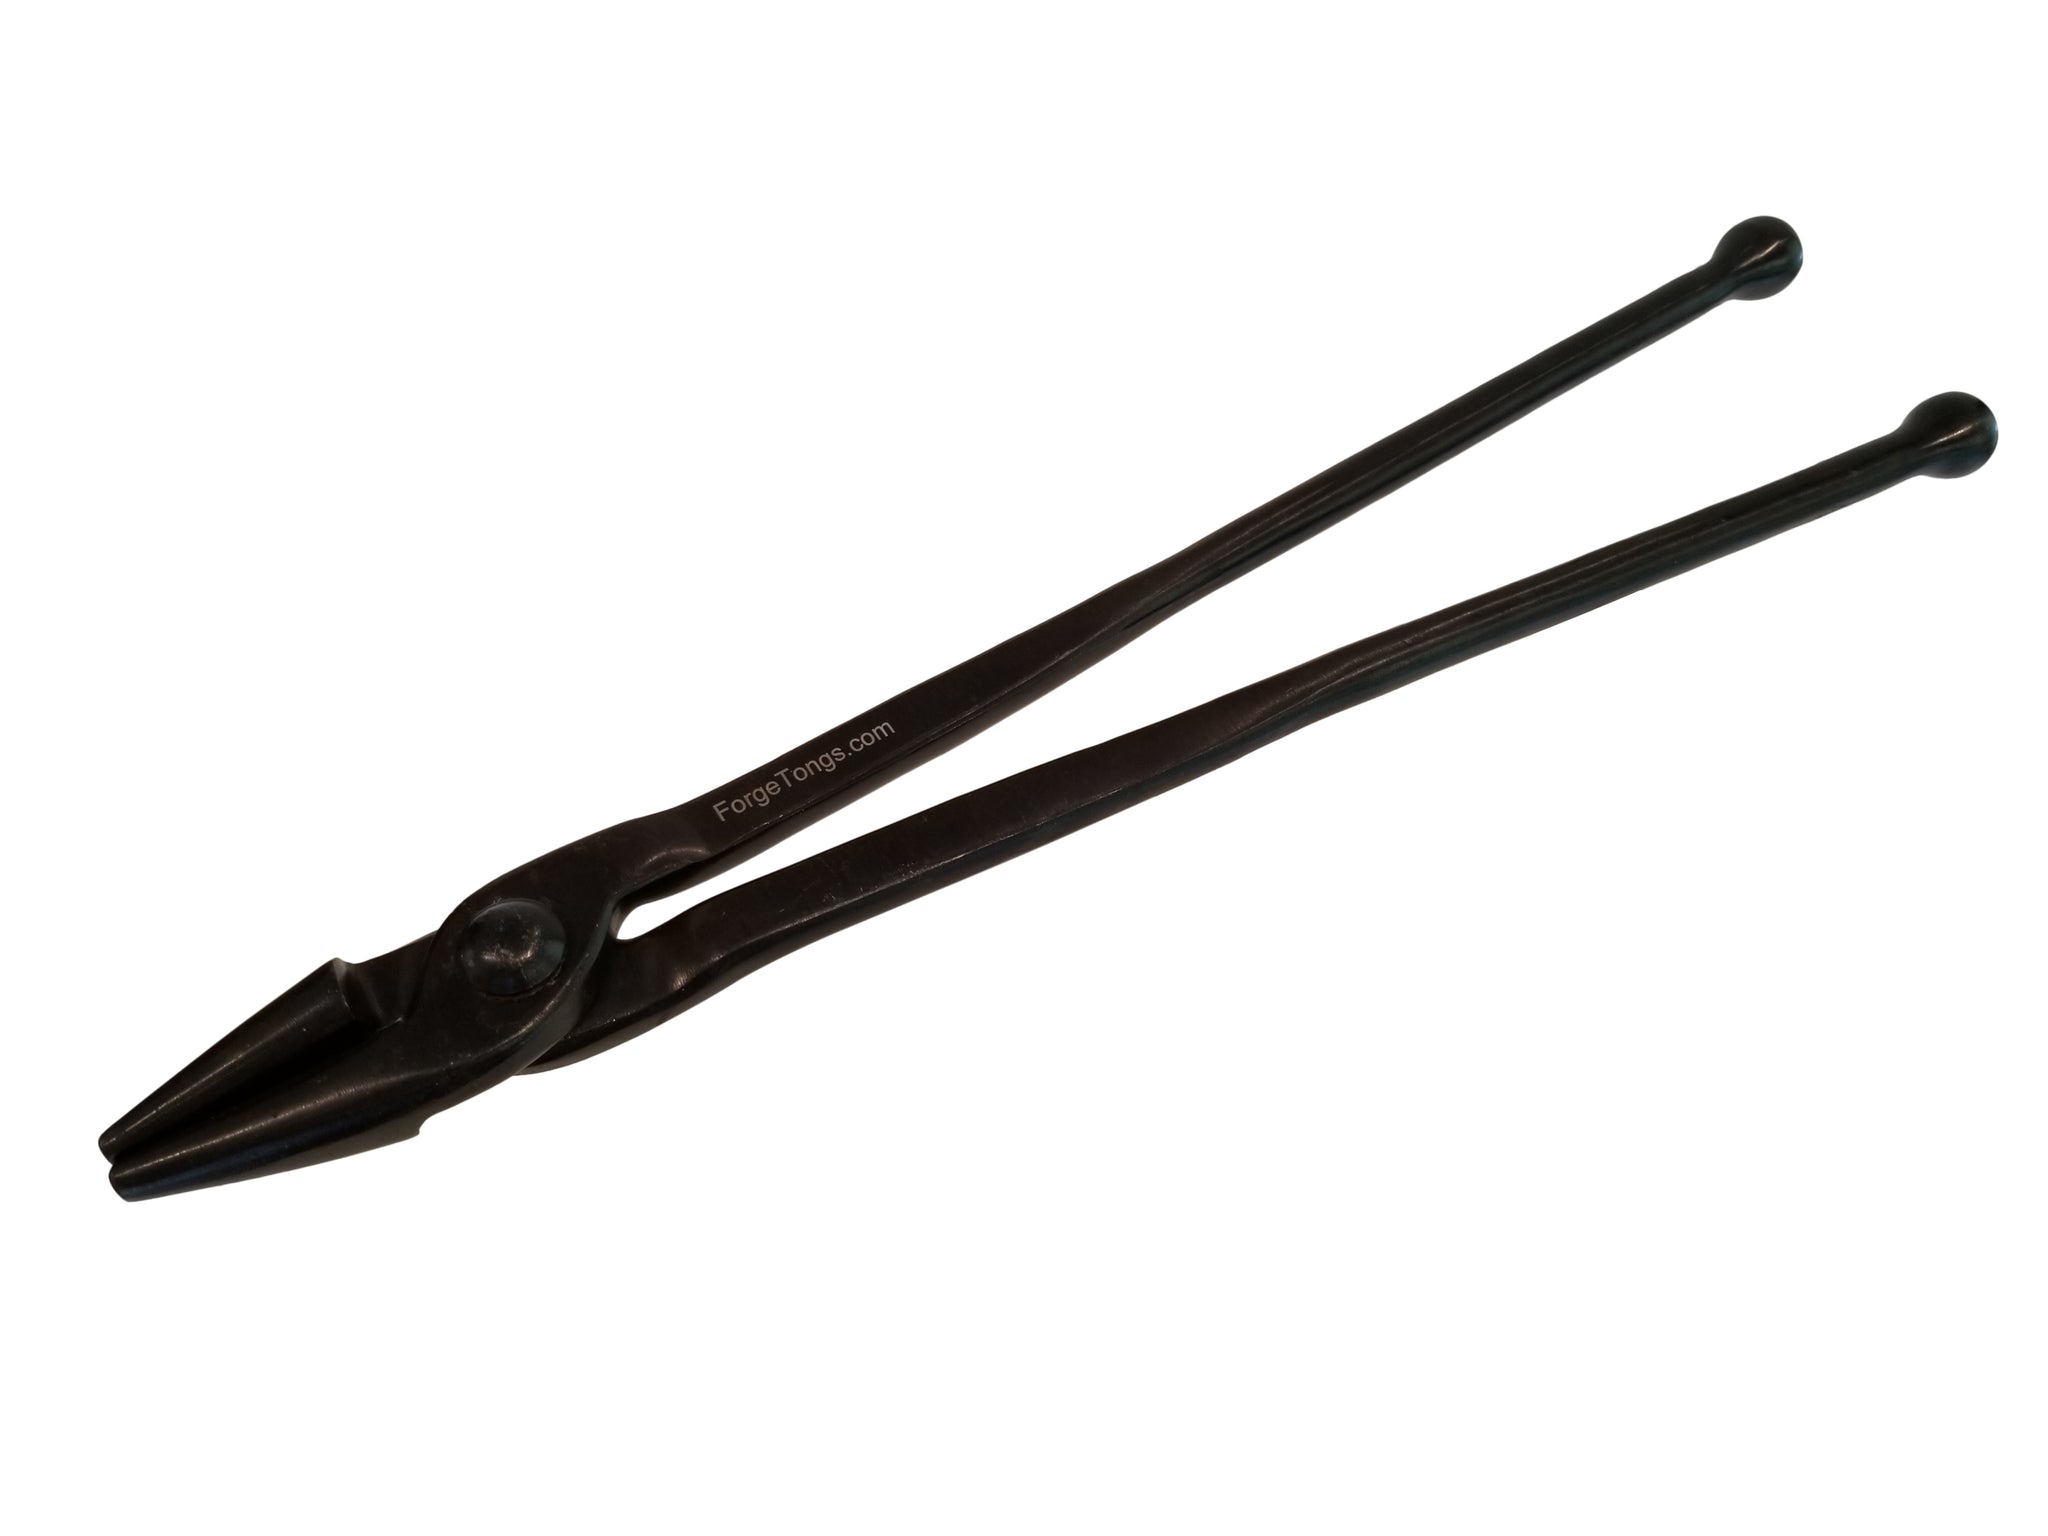 Long Needle Scrolling Forge Tongs